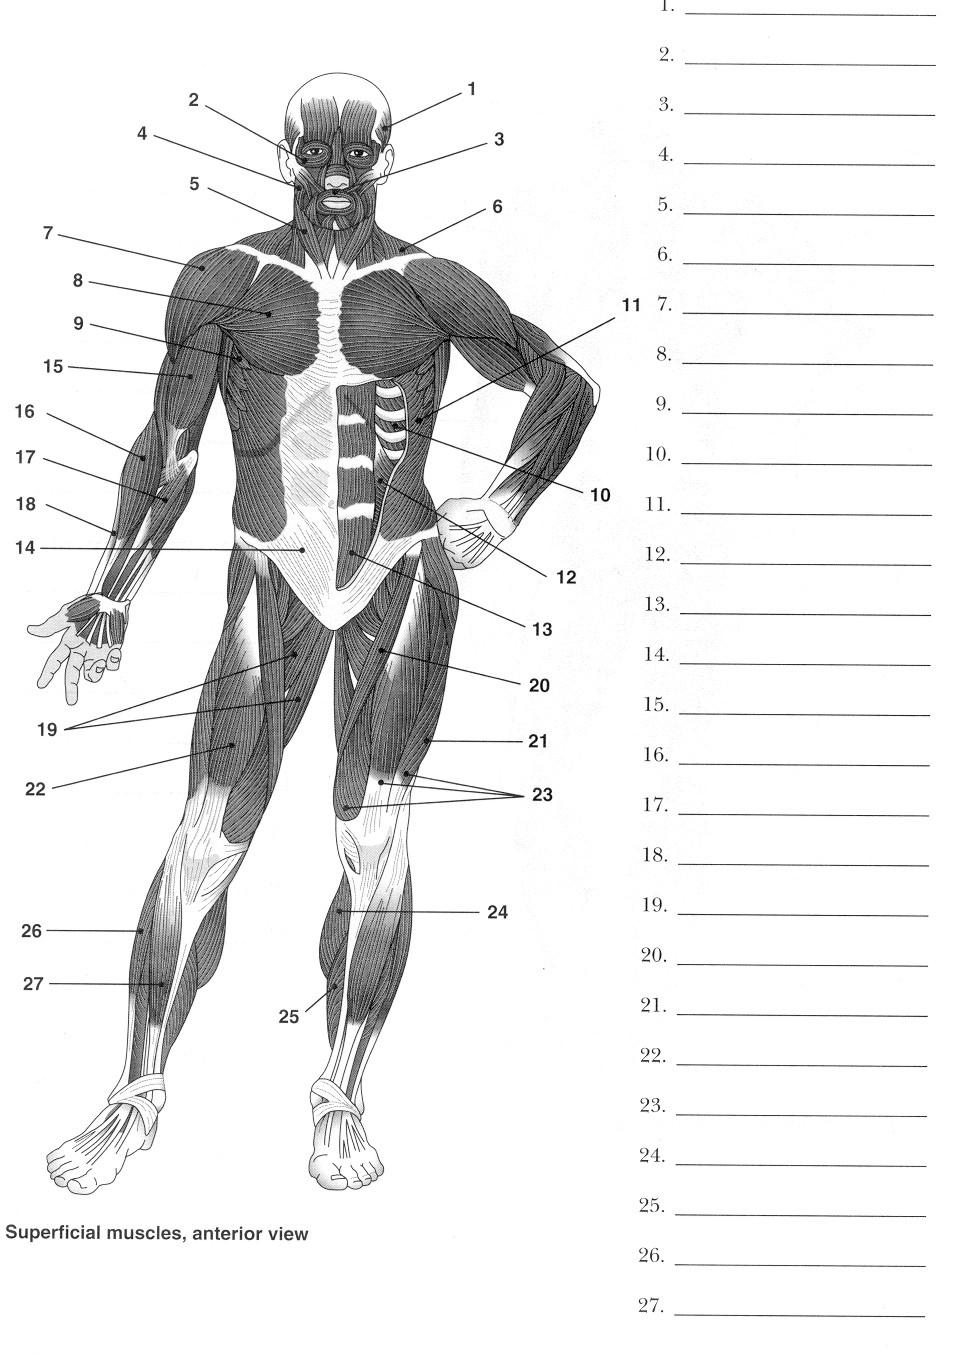 10 Best Images of Posterior Muscle Man Worksheet - Label ...